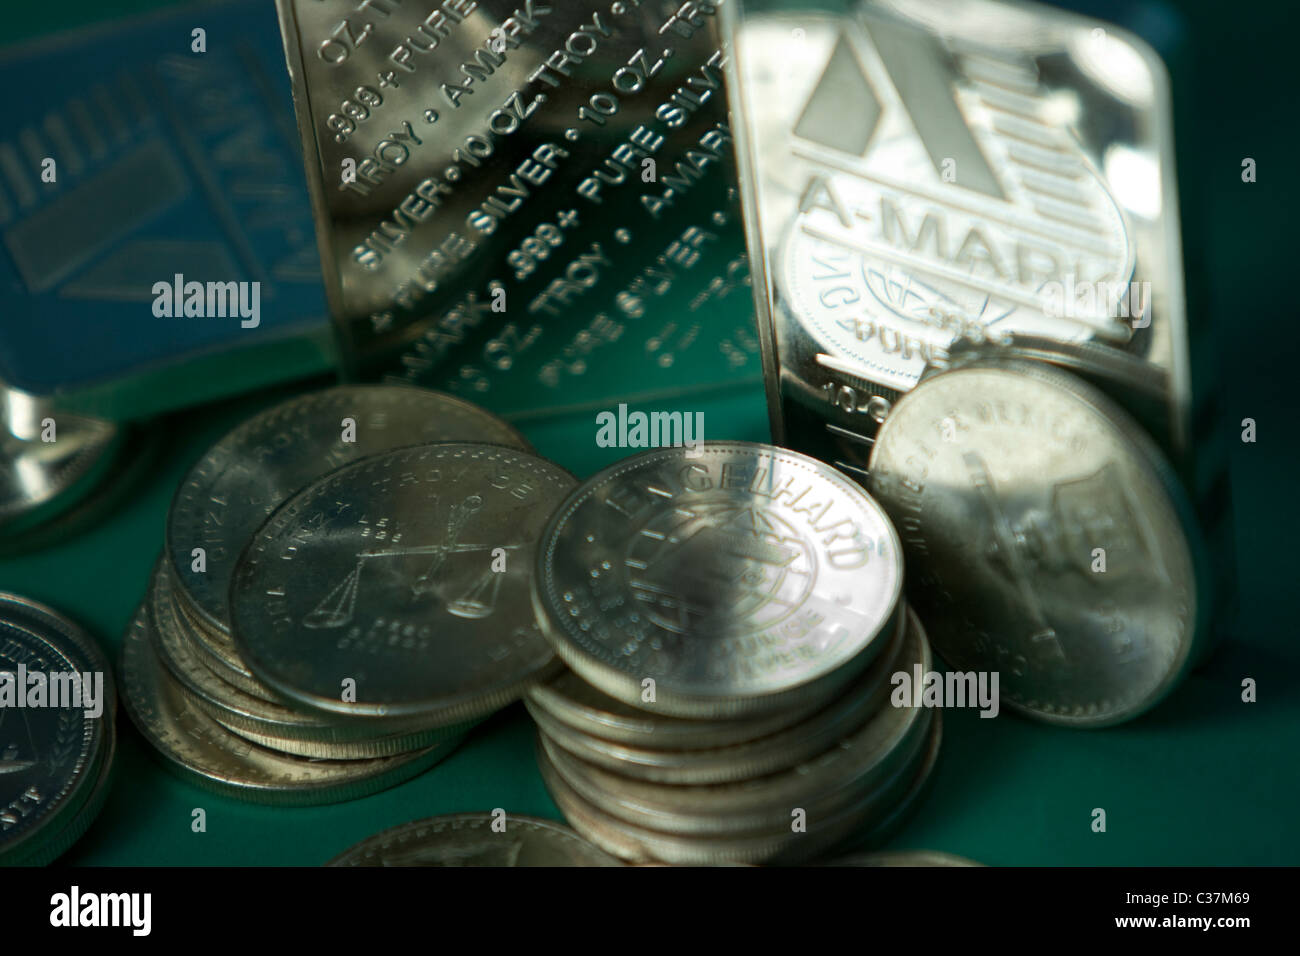 Pure Silver Bars and rounds Stock Photo